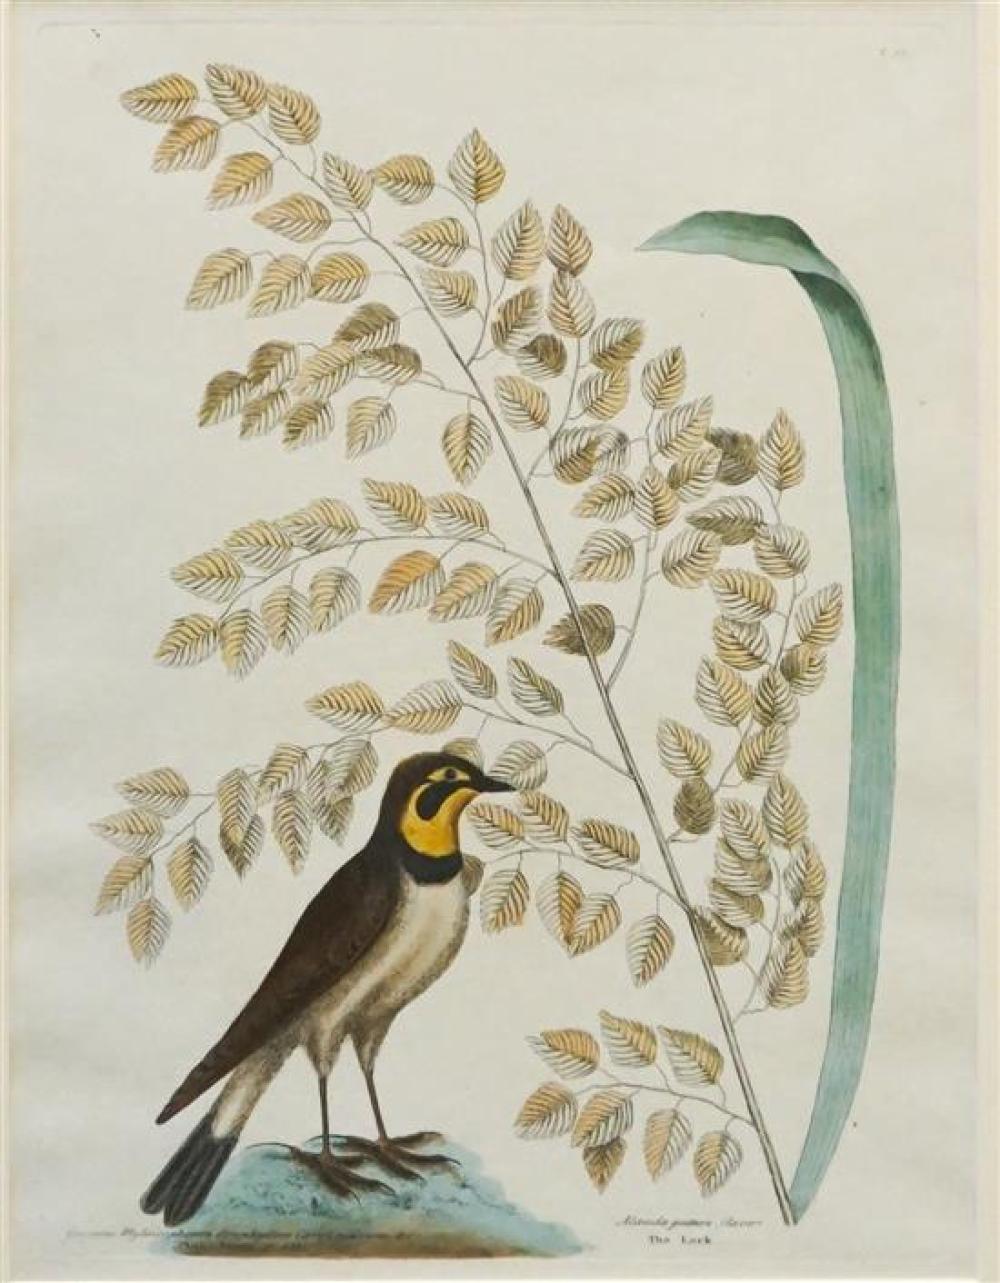 HAND-COLORED ENGRAVING OF LARK,